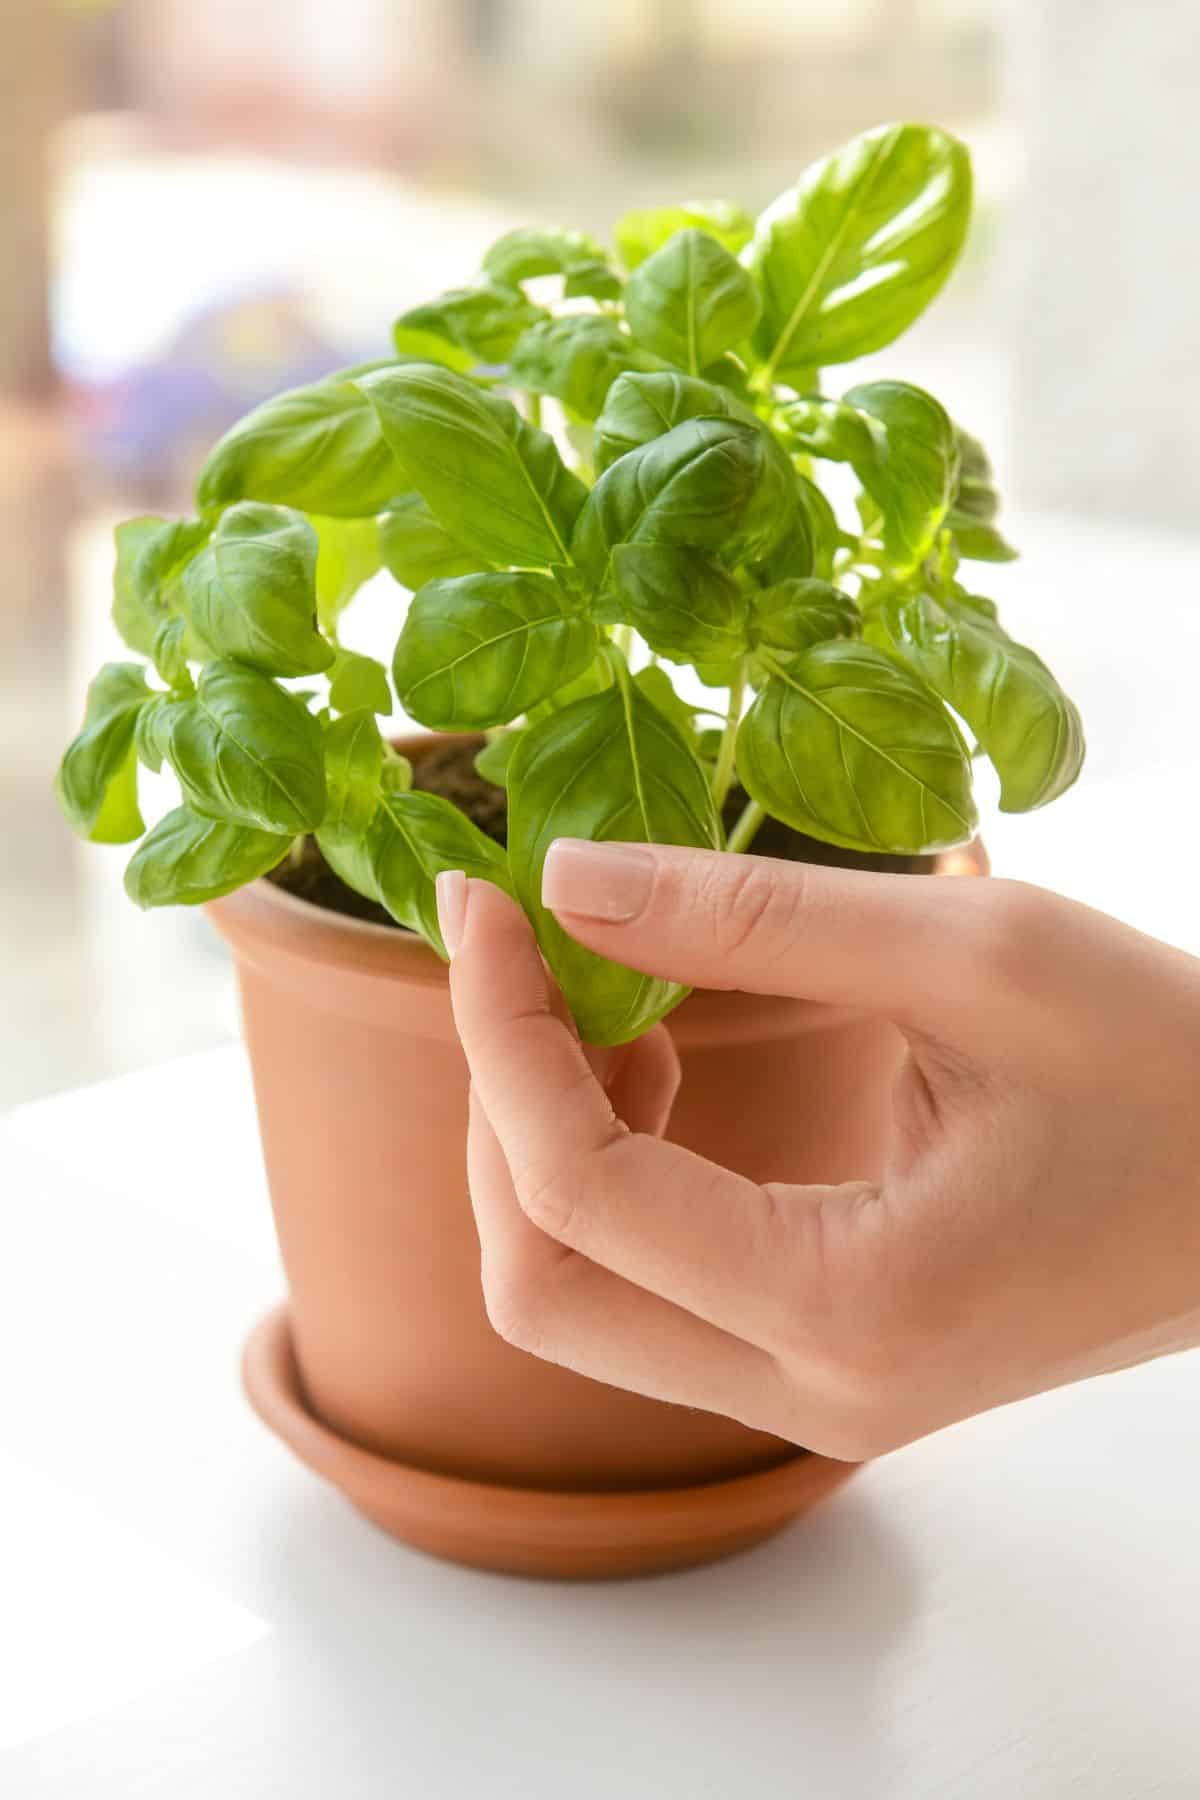 A hand pinching off a leaf of basil from a potted basil plant.